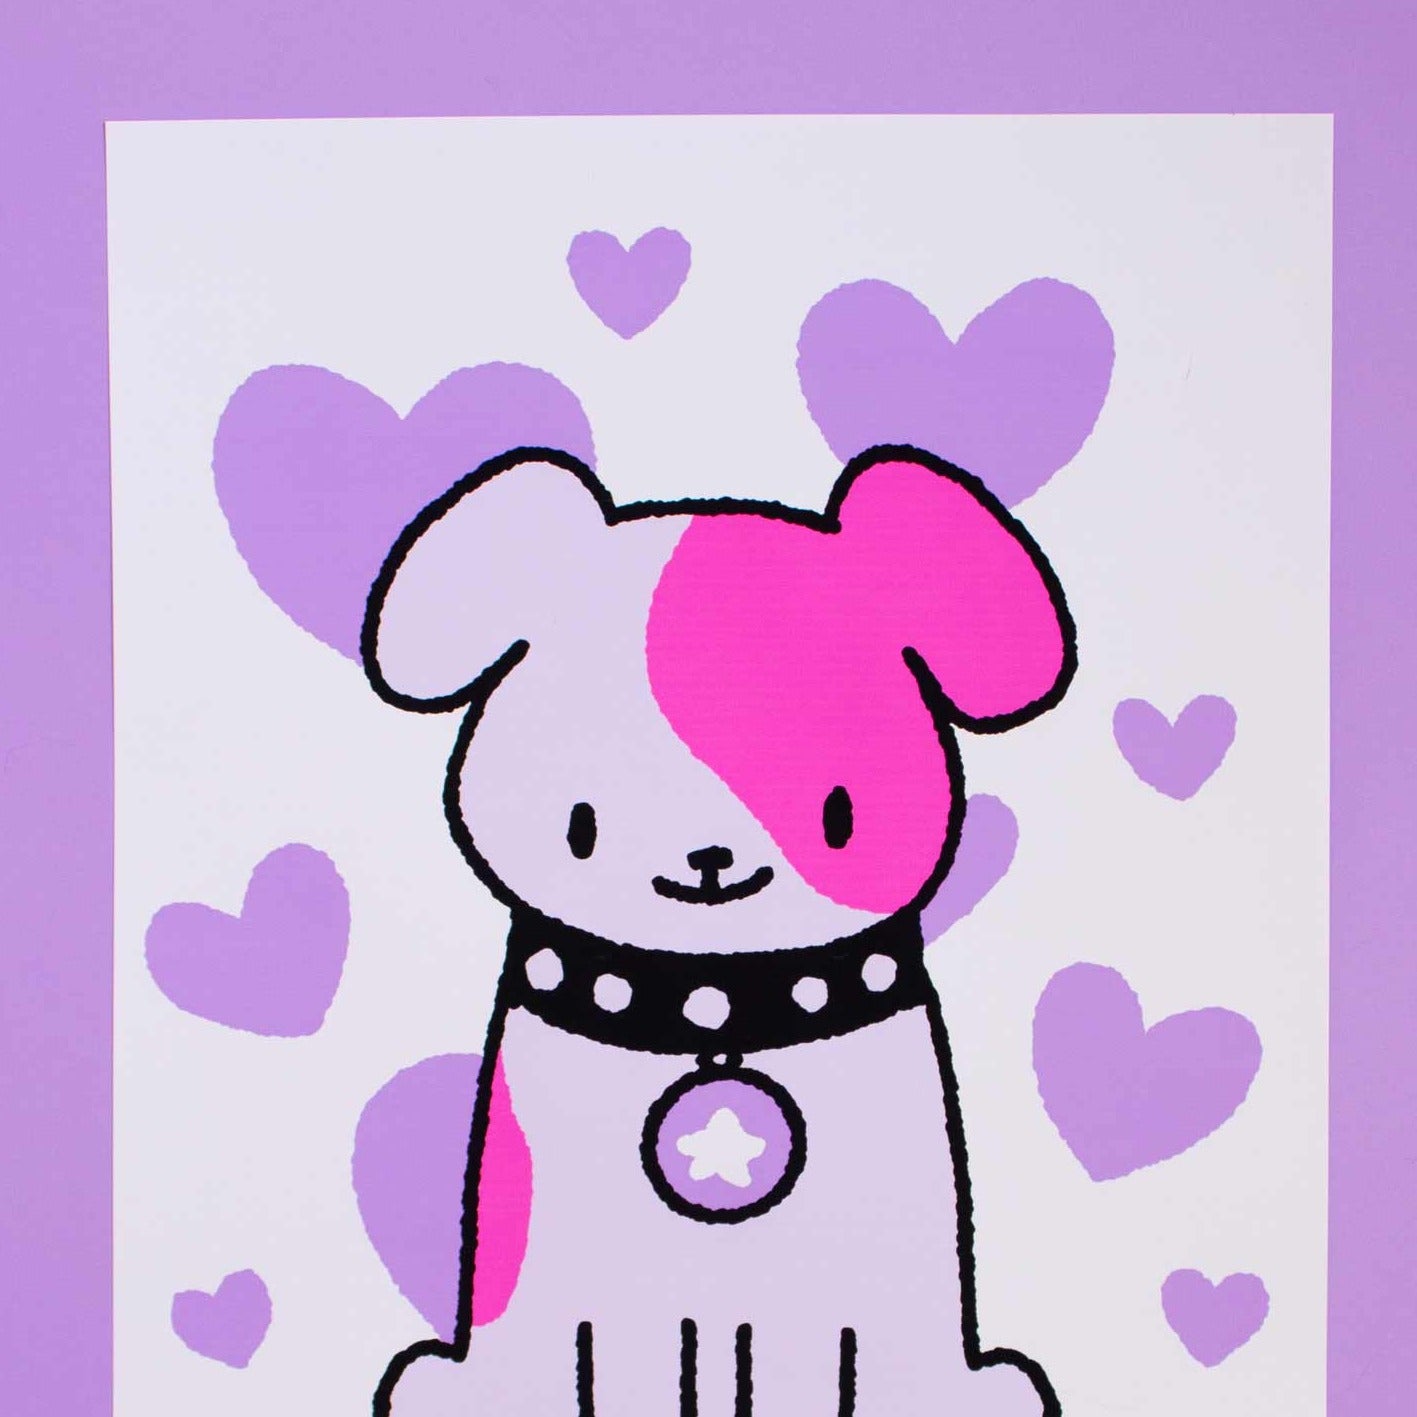 Woof Woof Poster 11x17"